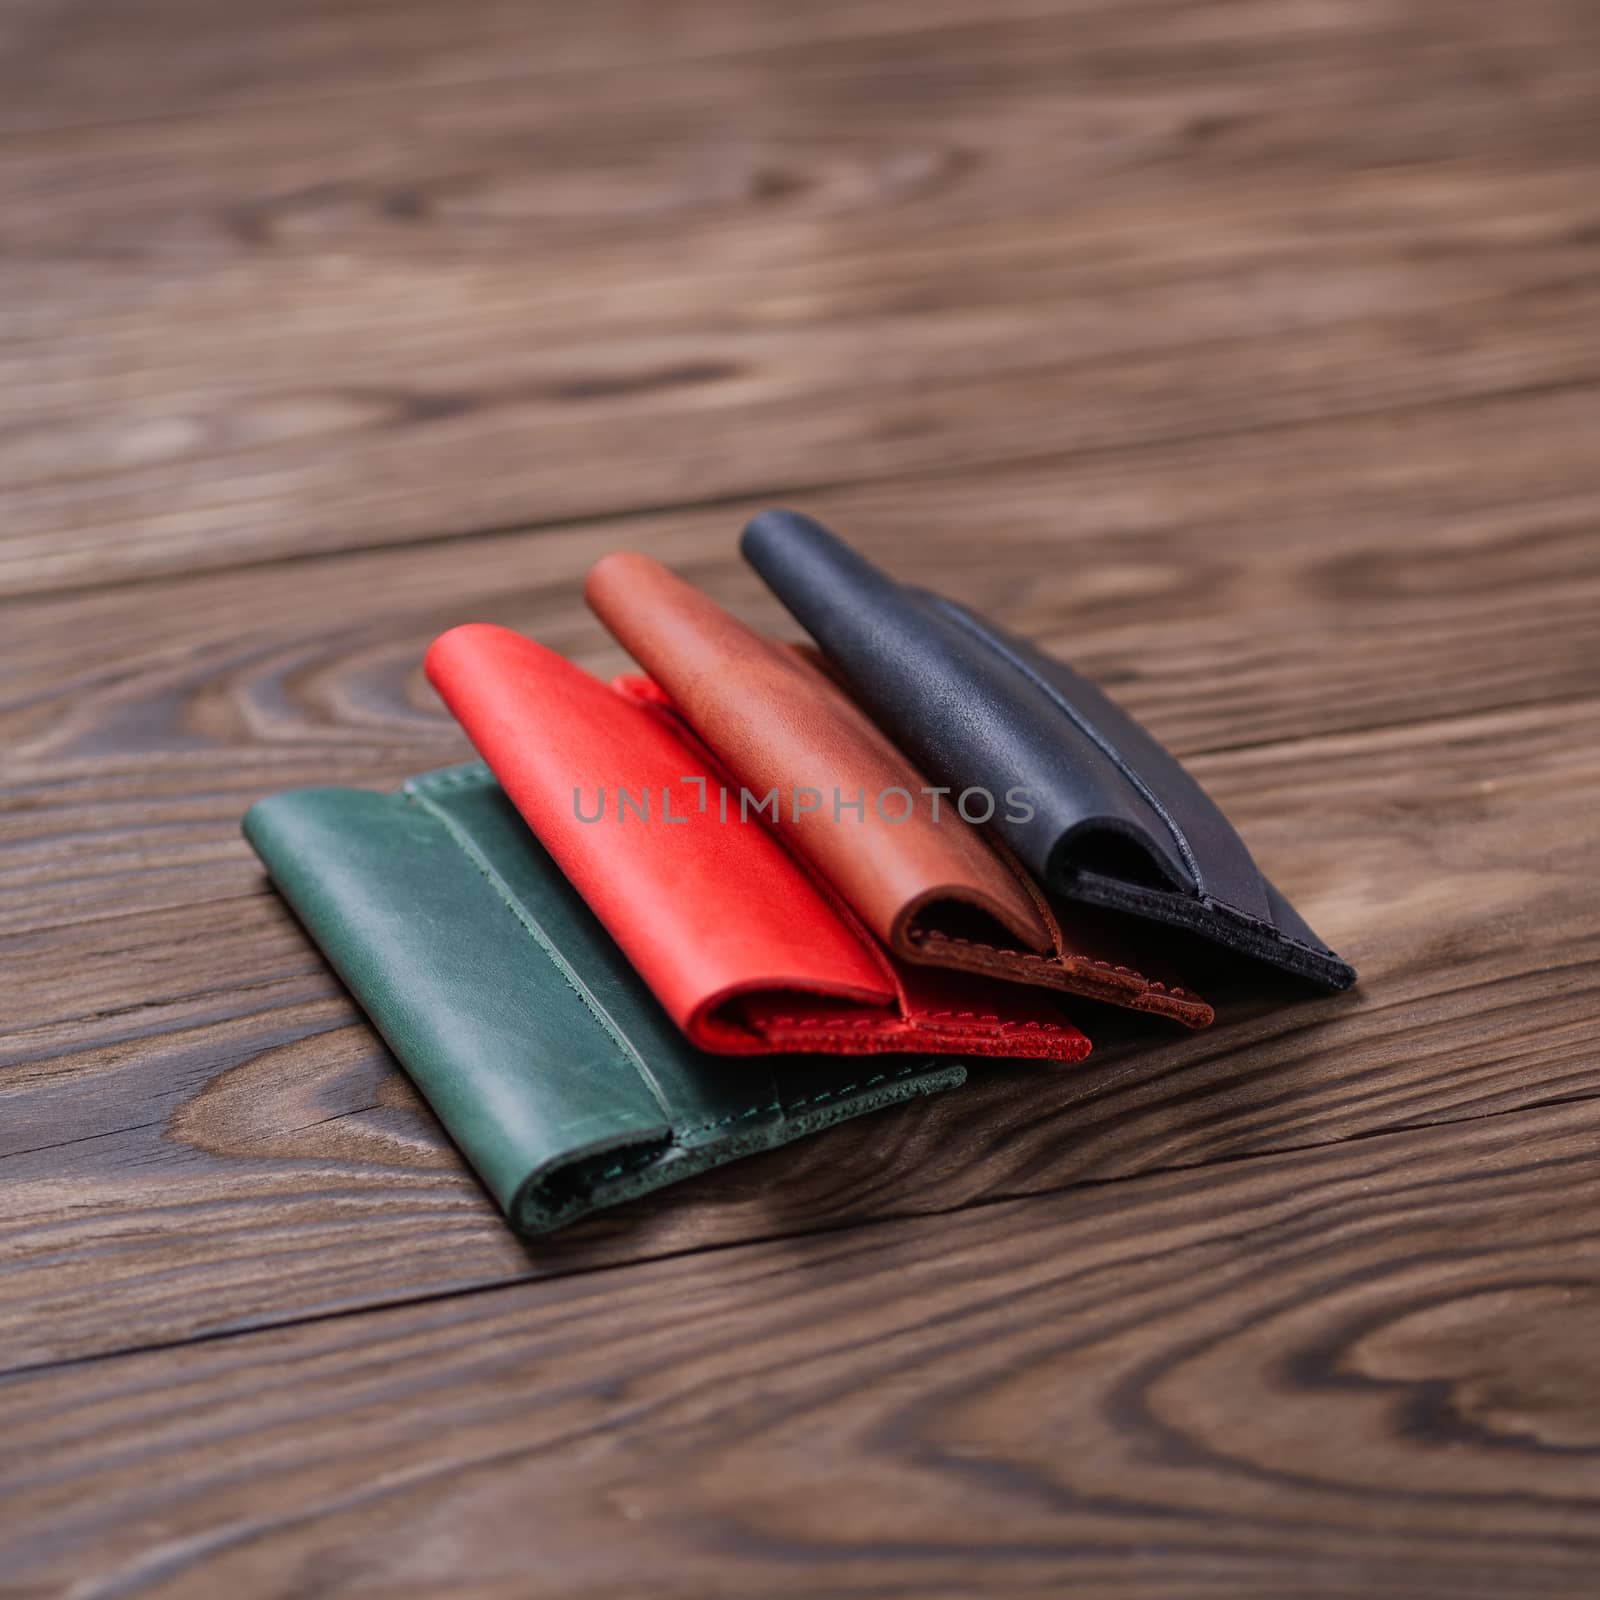 Flat lay photo of four different colour handmade leather one pocket cardholders.  Red, black, ginger and green colors. Stock photo on wooden background.